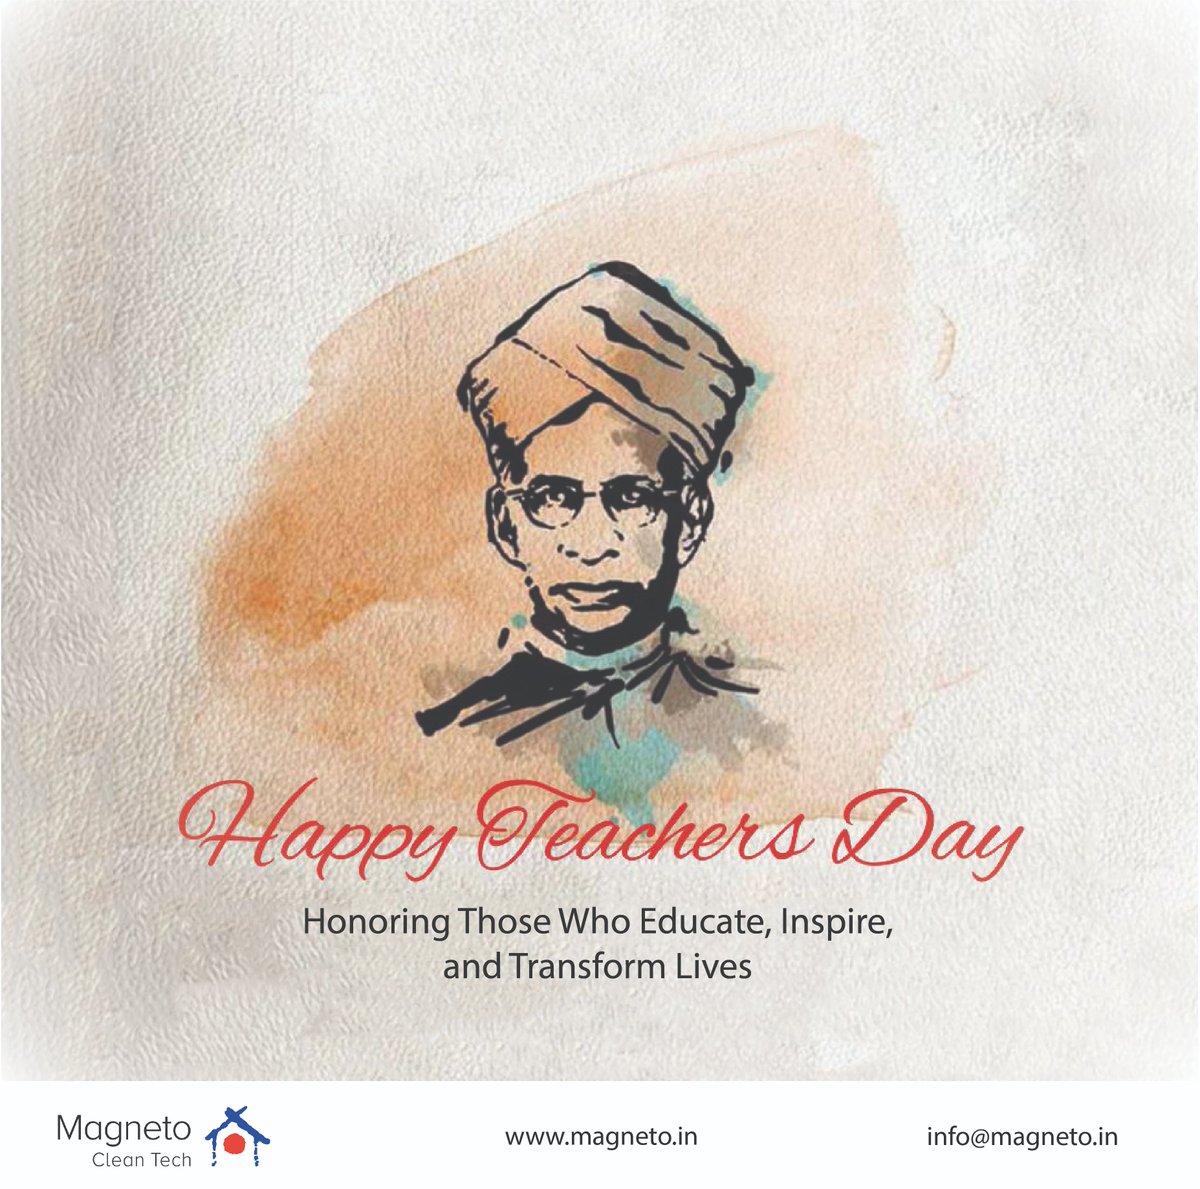 Caption: Thank you for helping us grow, learn, and dream.
#TeachersDay #TeacherAppreciation #Educators #InspiringTeachers #TeachingHeroes #Mentors #MagnetoCleantech #CleanAirEducation #HVACTechnology #AirPurification #IndoorAirQuality #SustainableLiving #CleanAirSolutions